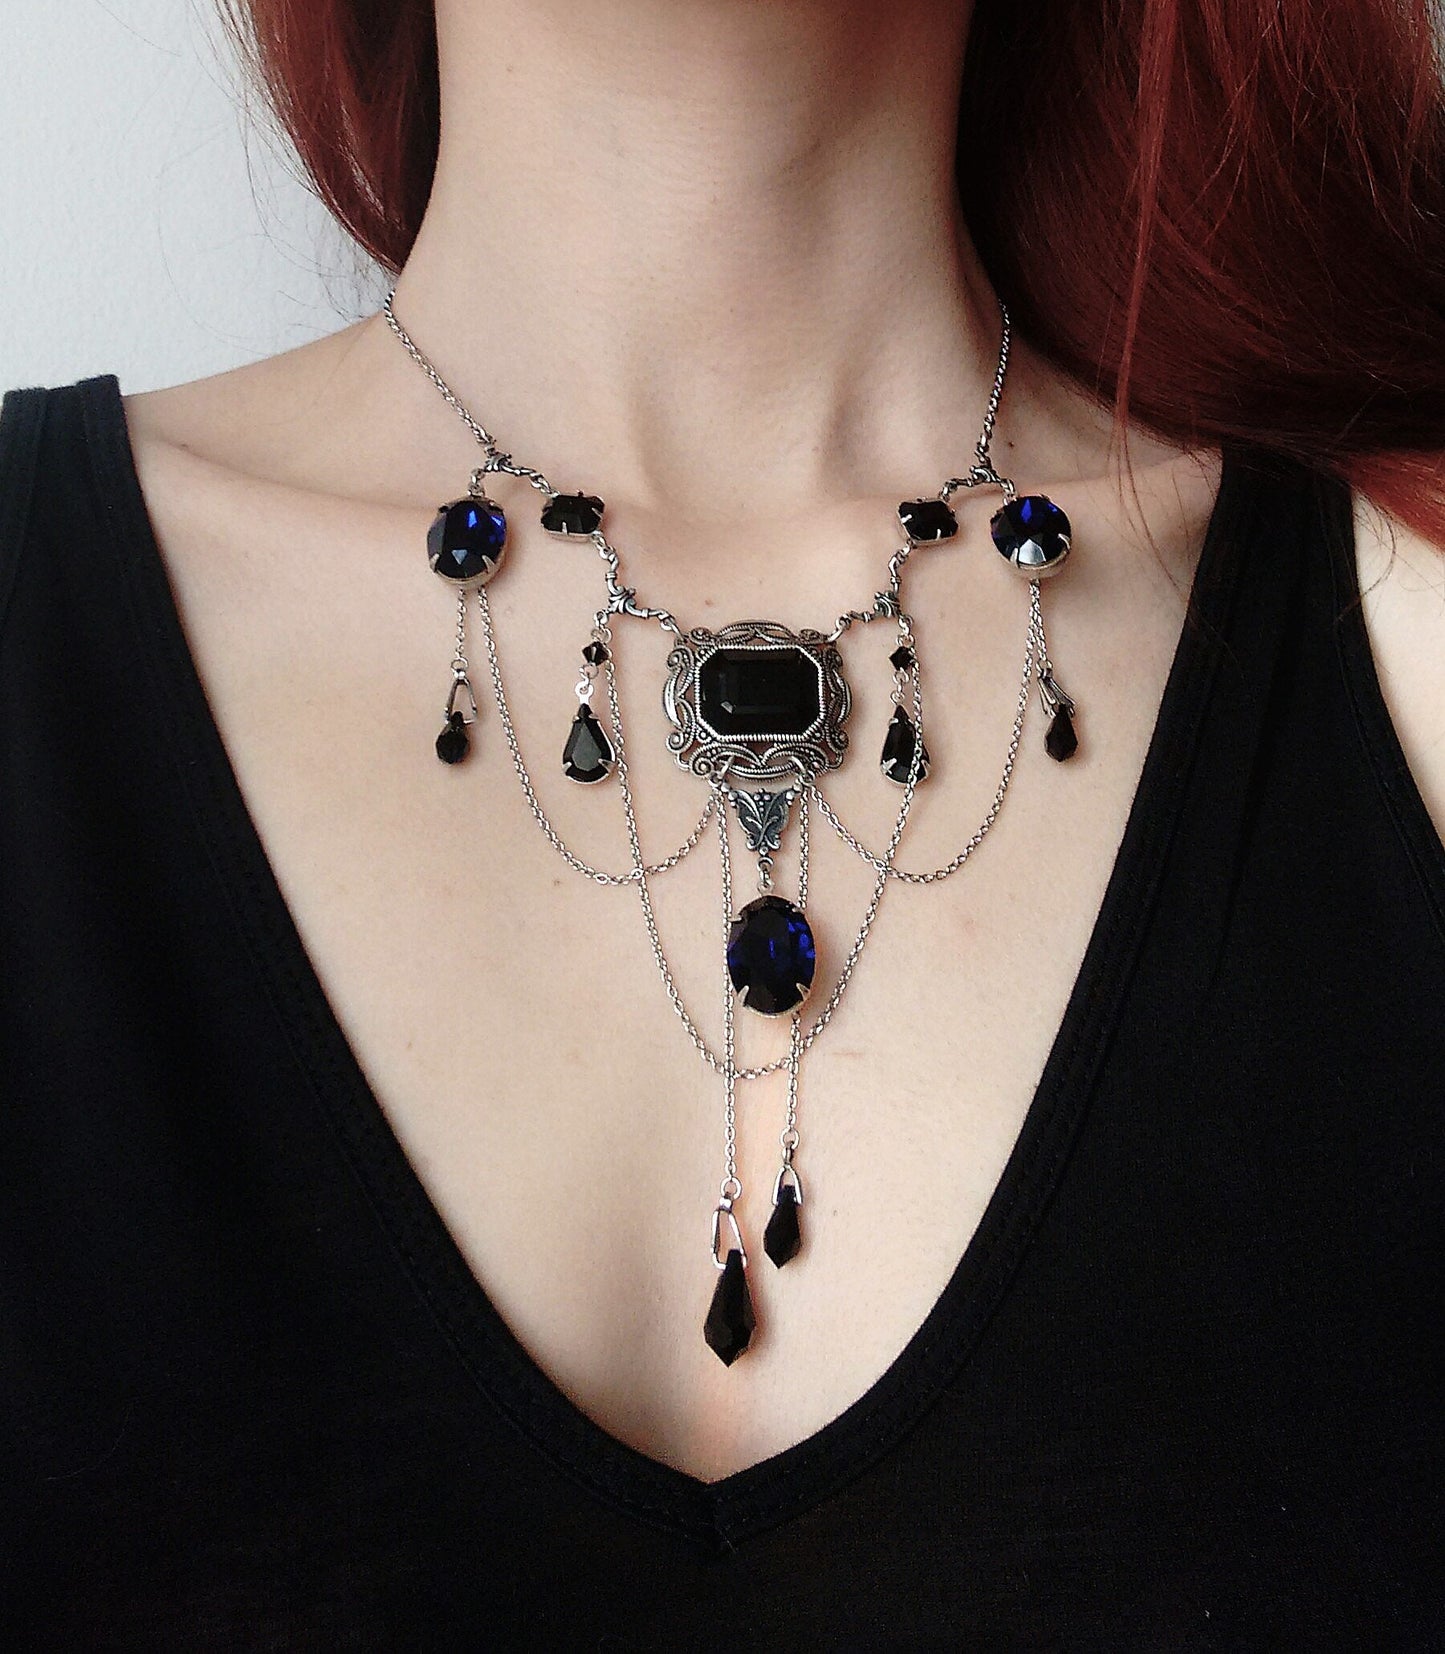 Black and Burgundy Waterfall Necklace